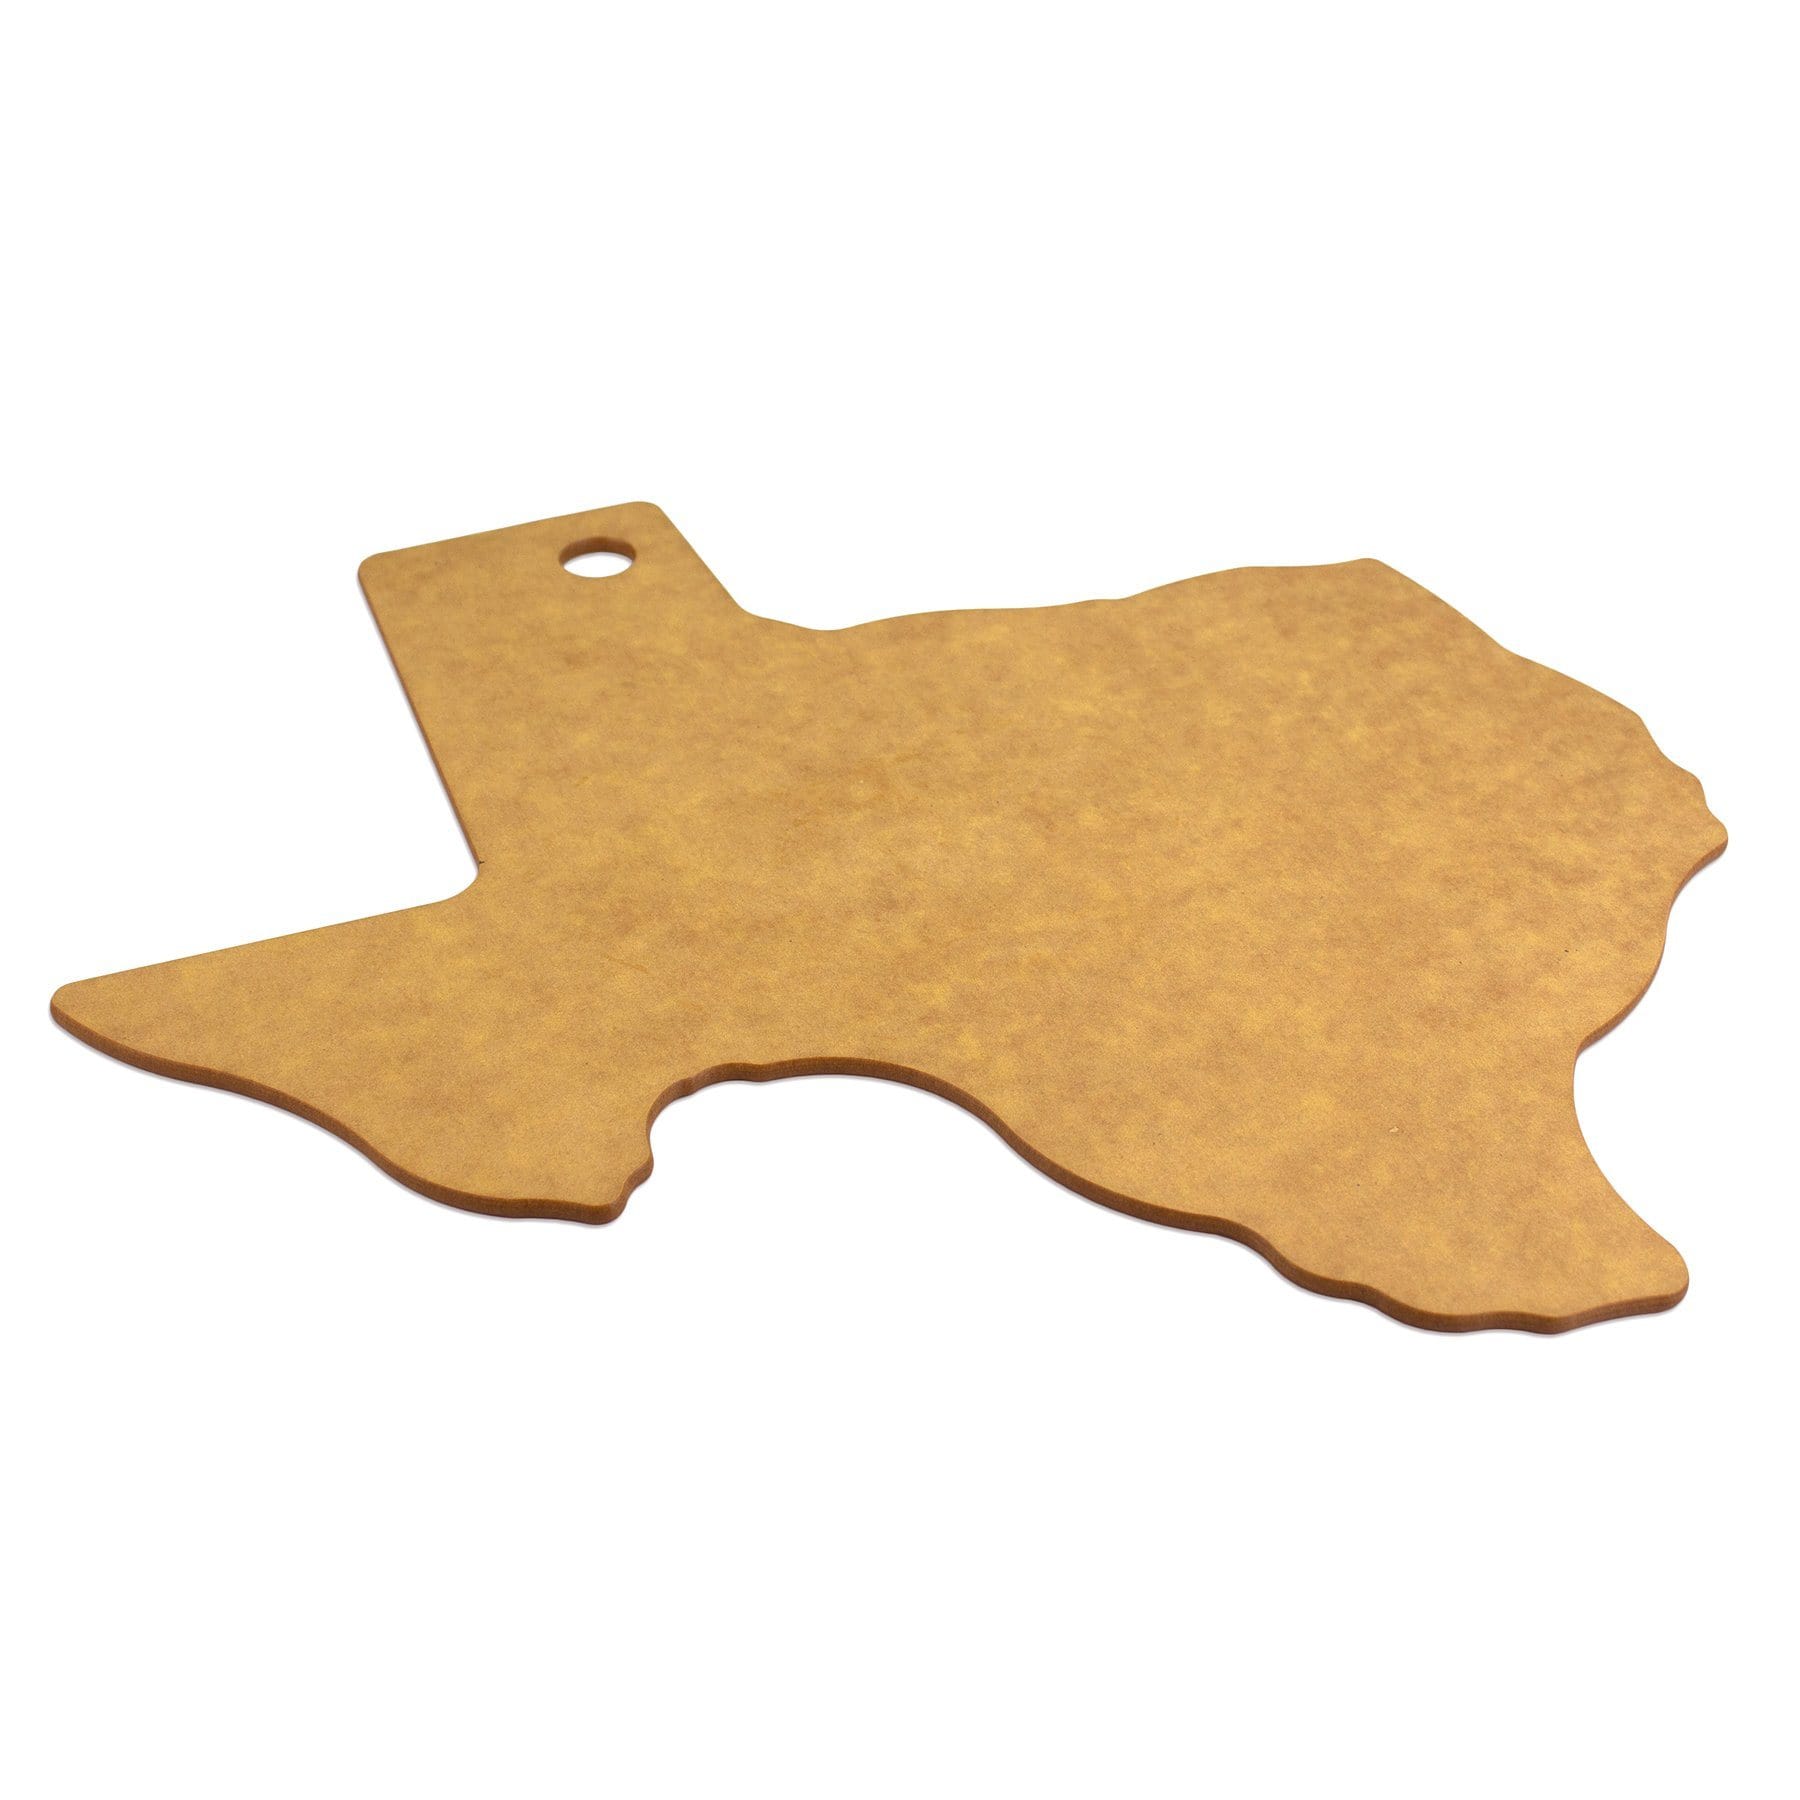 https://totallybamboo.com/cdn/shop/products/vellum-texas-shaped-wood-paper-composite-serving-and-cutting-board-13-14-x-13-dishwasher-safe-totally-bamboo-435109.jpg?v=1627907417